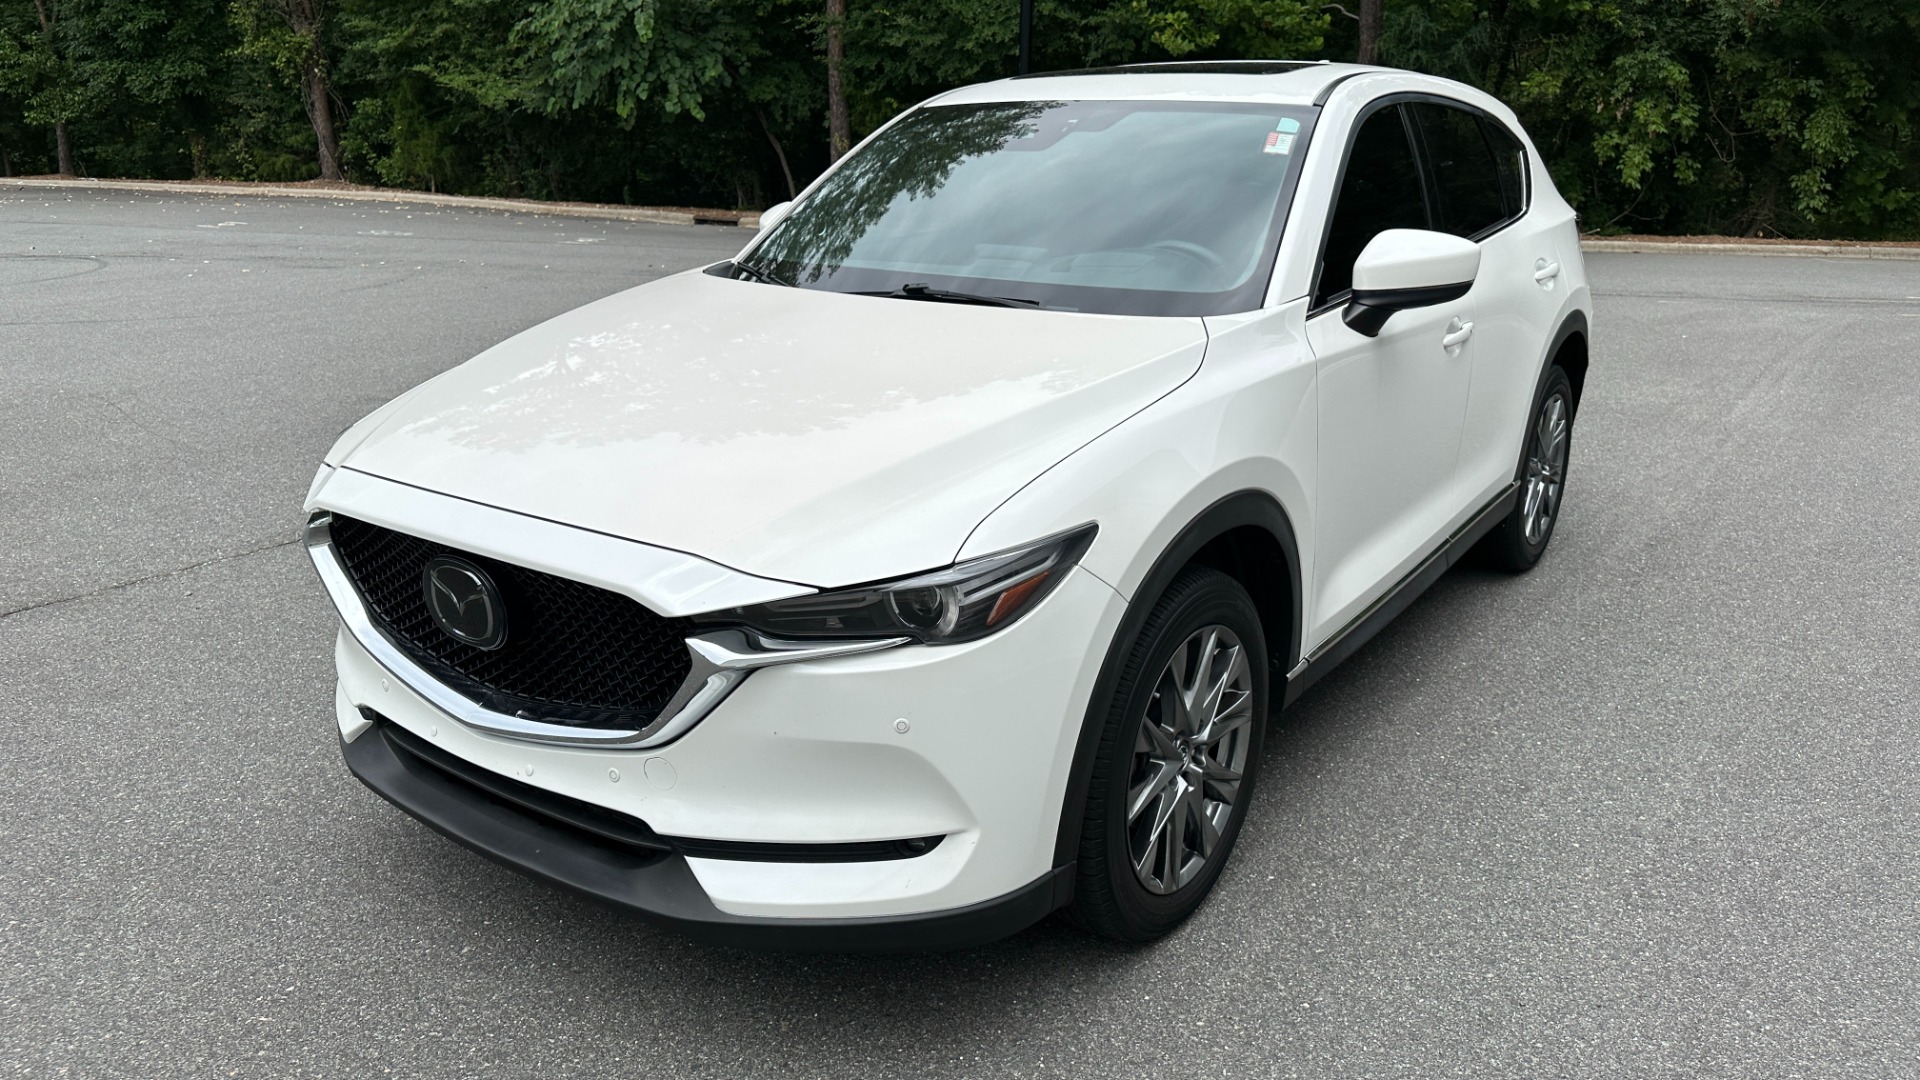 Used 2019 Mazda CX-5 Signature for sale $26,495 at Formula Imports in Charlotte NC 28227 2